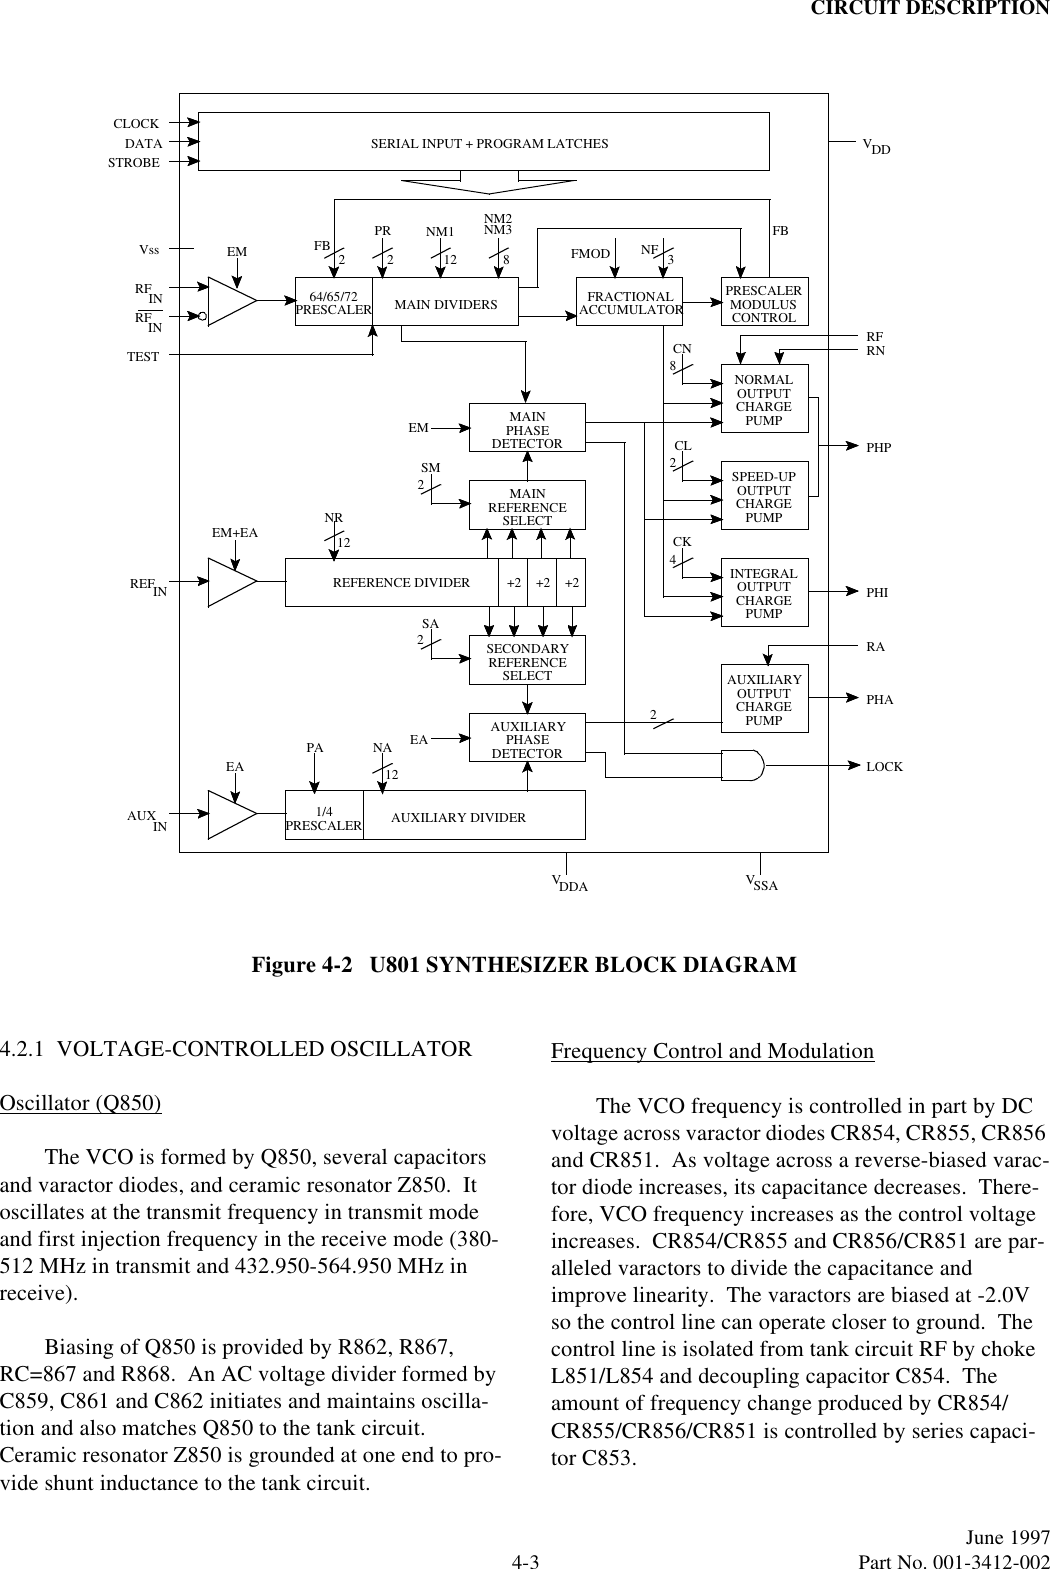 CIRCUIT DESCRIPTION4-3June 1997  Part No. 001-3412-002Figure 4-2   U801 SYNTHESIZER BLOCK DIAGRAMCLOCKDATASTROBEVssRFINRFIN64/65/72PRESCALER MAIN DIVIDERSEM FB 2 2 12 8PR NM1 NM3NM2FRACTIONALACCUMULATORPRESCALERMODULUSCONTROL3FMOD NFFBSERIAL INPUT + PROGRAM LATCHES VDDTESTINREFEM+EAREFERENCE DIVIDER +2 +2 +2MAINMAINPHASEDETECTORREFERENCESELECT2SMEMREFERENCESELECT2SASECONDARYPHASEDETECTOREA AUXILIARYINEAAUX12NR12NAPAAUXILIARY DIVIDERPRESCALER1/4NORMALOUTPUTCHARGEPUMPOUTPUTCHARGEPUMPSPEED-UPOUTPUTCHARGEPUMPINTEGRALOUTPUTCHARGEPUMPAUXILIARYCN8CL2CK42VSSAVDDALOCKPHARAPHIPHPRNRFFrequency Control and ModulationThe VCO frequency is controlled in part by DC voltage across varactor diodes CR854, CR855, CR856 and CR851.  As voltage across a reverse-biased varac-tor diode increases, its capacitance decreases.  There-fore, VCO frequency increases as the control voltage increases.  CR854/CR855 and CR856/CR851 are par-alleled varactors to divide the capacitance and improve linearity.  The varactors are biased at -2.0V so the control line can operate closer to ground.  The control line is isolated from tank circuit RF by choke L851/L854 and decoupling capacitor C854.  The amount of frequency change produced by CR854/CR855/CR856/CR851 is controlled by series capaci-tor C853.4.2.1  VOLTAGE-CONTROLLED OSCILLATOROscillator (Q850)The VCO is formed by Q850, several capacitors and varactor diodes, and ceramic resonator Z850.  It oscillates at the transmit frequency in transmit mode and first injection frequency in the receive mode (380-512 MHz in transmit and 432.950-564.950 MHz in receive).Biasing of Q850 is provided by R862, R867, RC=867 and R868.  An AC voltage divider formed by C859, C861 and C862 initiates and maintains oscilla-tion and also matches Q850 to the tank circuit.  Ceramic resonator Z850 is grounded at one end to pro-vide shunt inductance to the tank circuit.